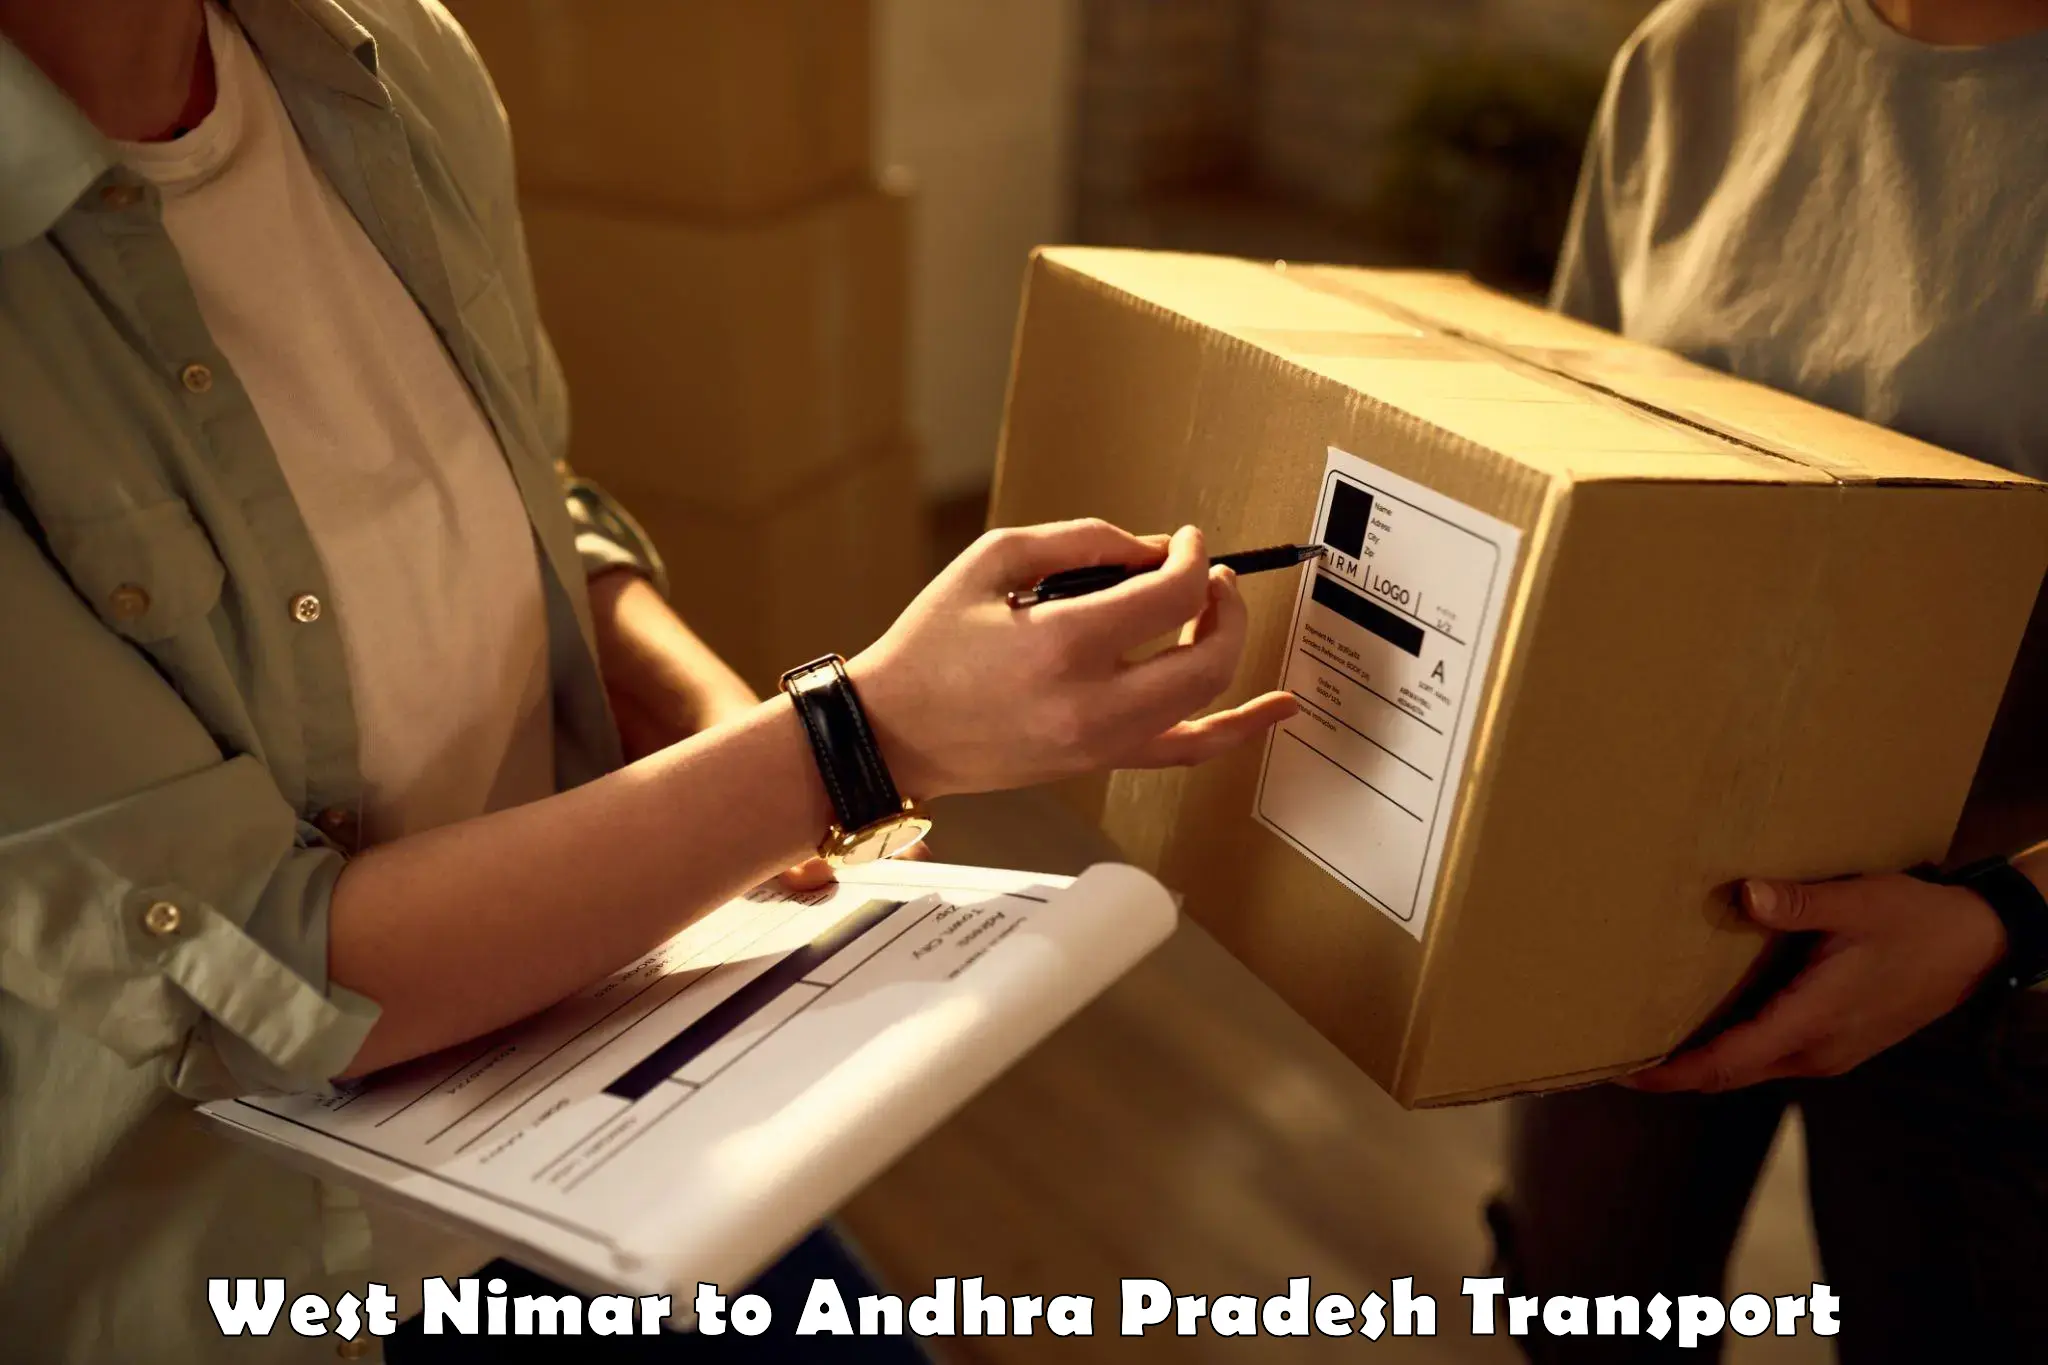 Air freight transport services West Nimar to Markapur